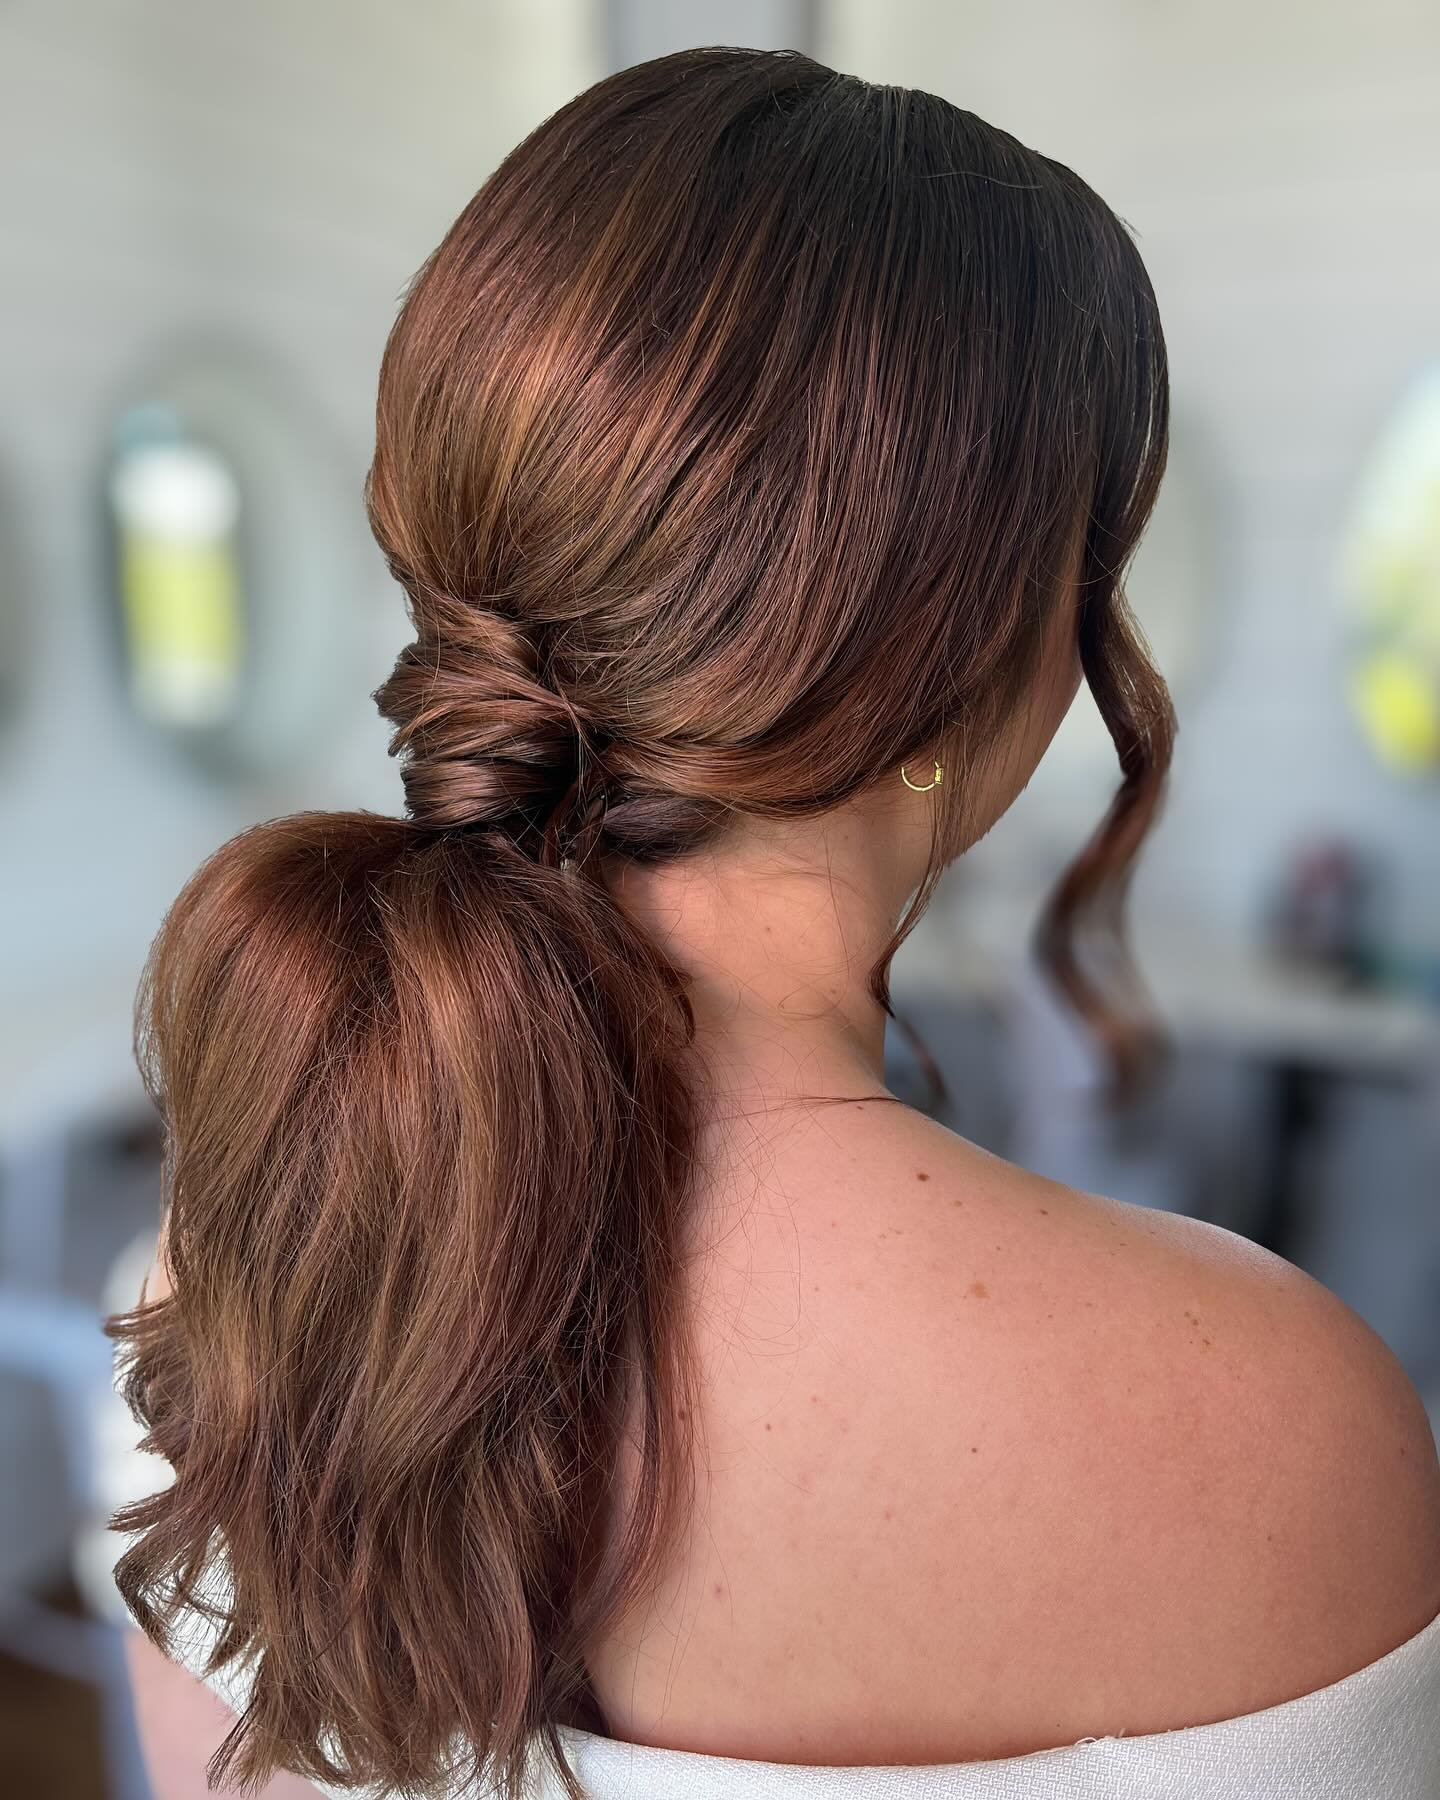 Tips for brunettes when picking out inspiration photos for your wedding hairstyle 👇🏼

1. Make sure you are selecting photos of people with the same hair color. Often time we save blonde photos because we are obsessed with how cute the style is but 